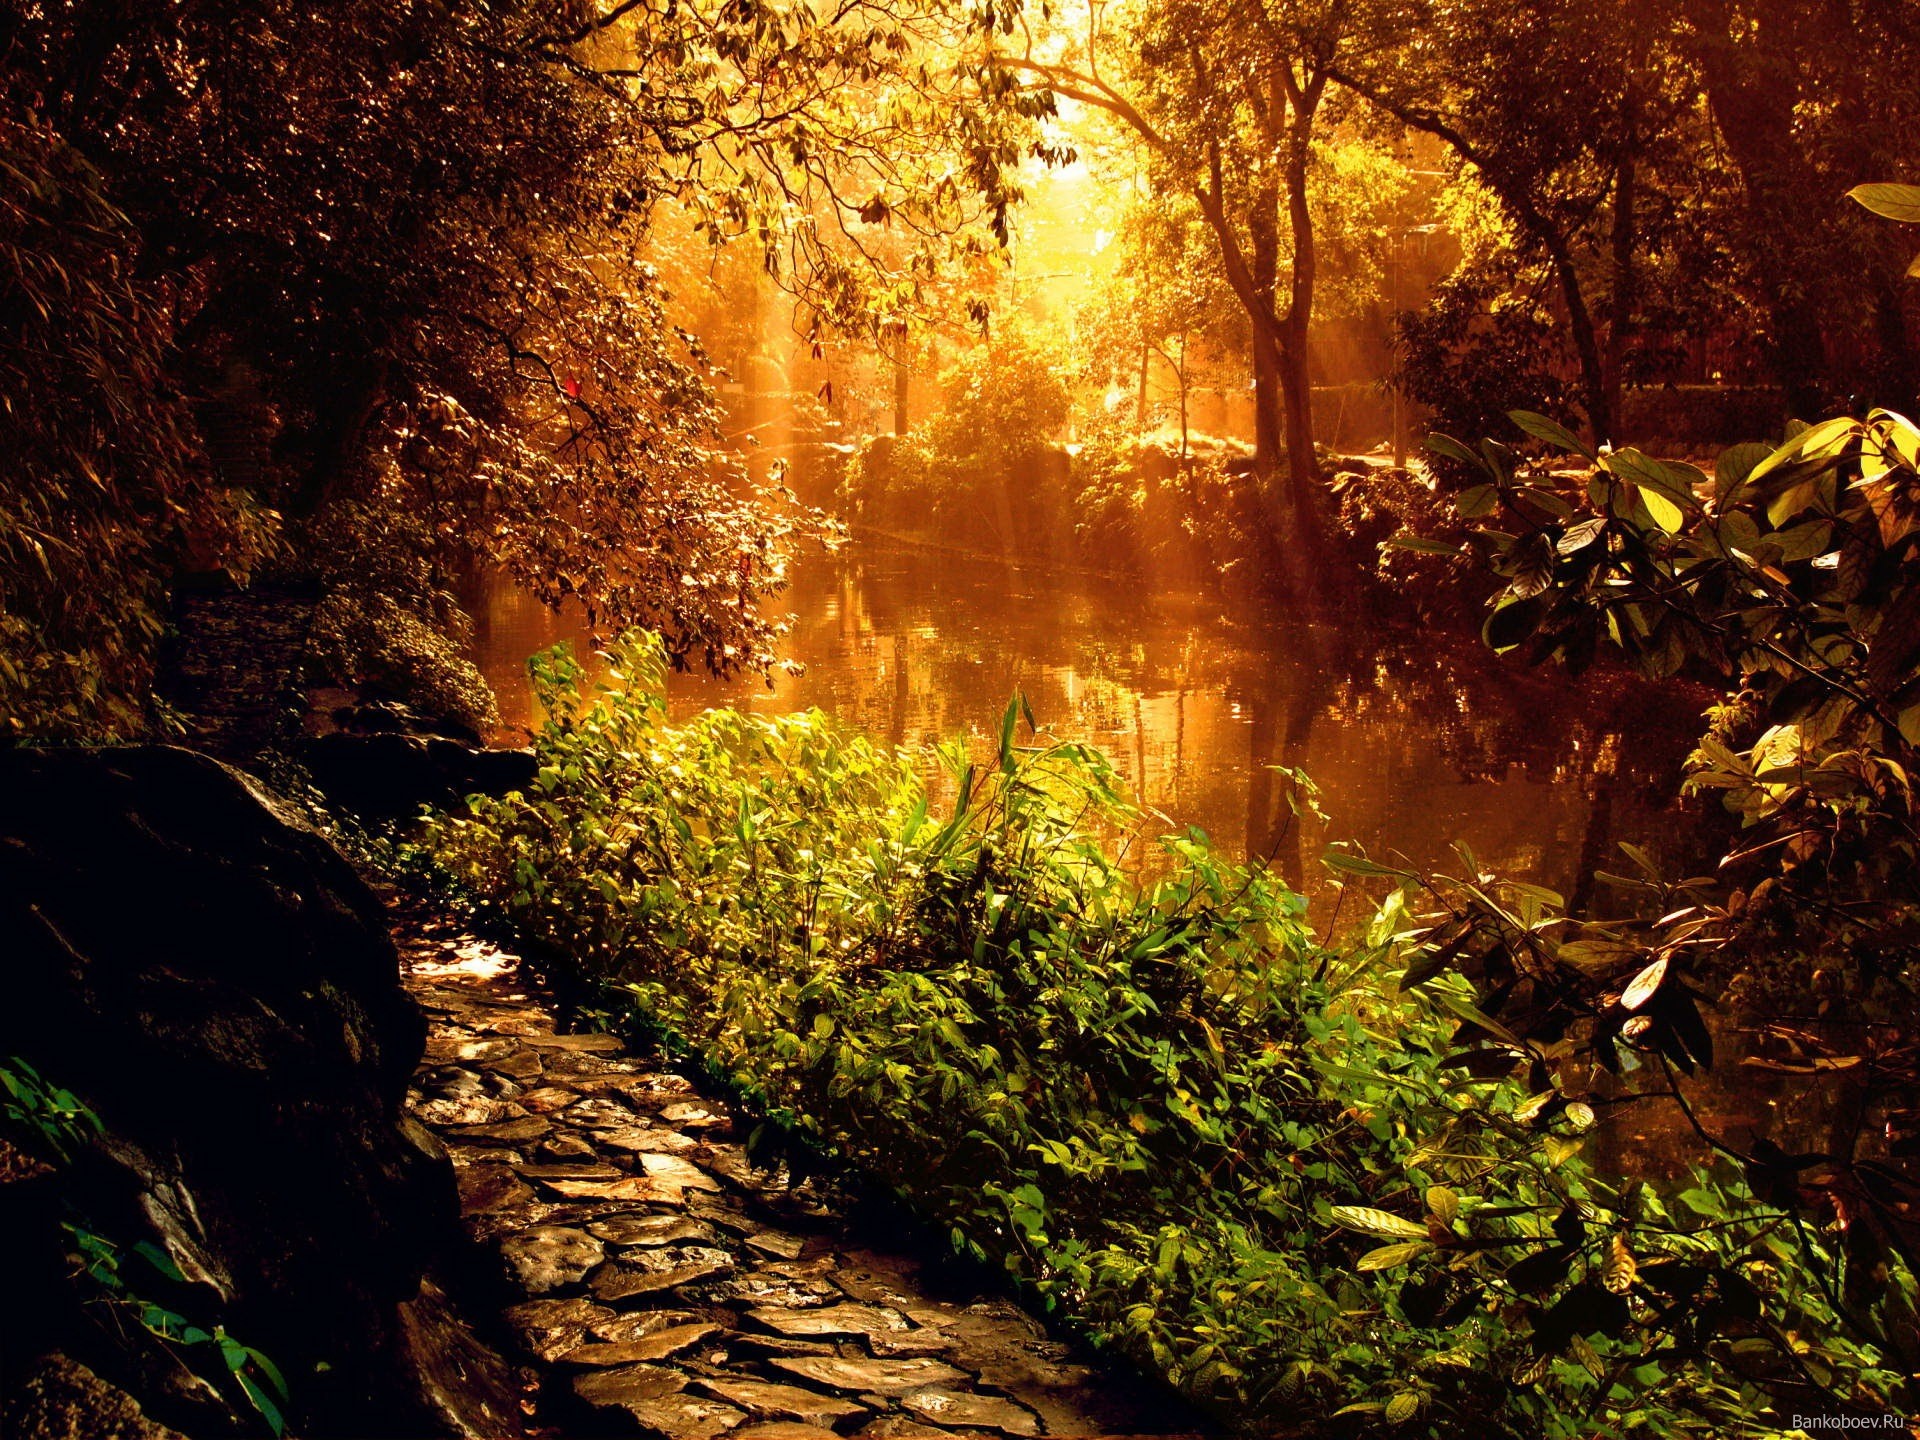 Mystical Backgrounds HQ wallpaper Mystic Road 1280 x 1024 on the desktop, high quality